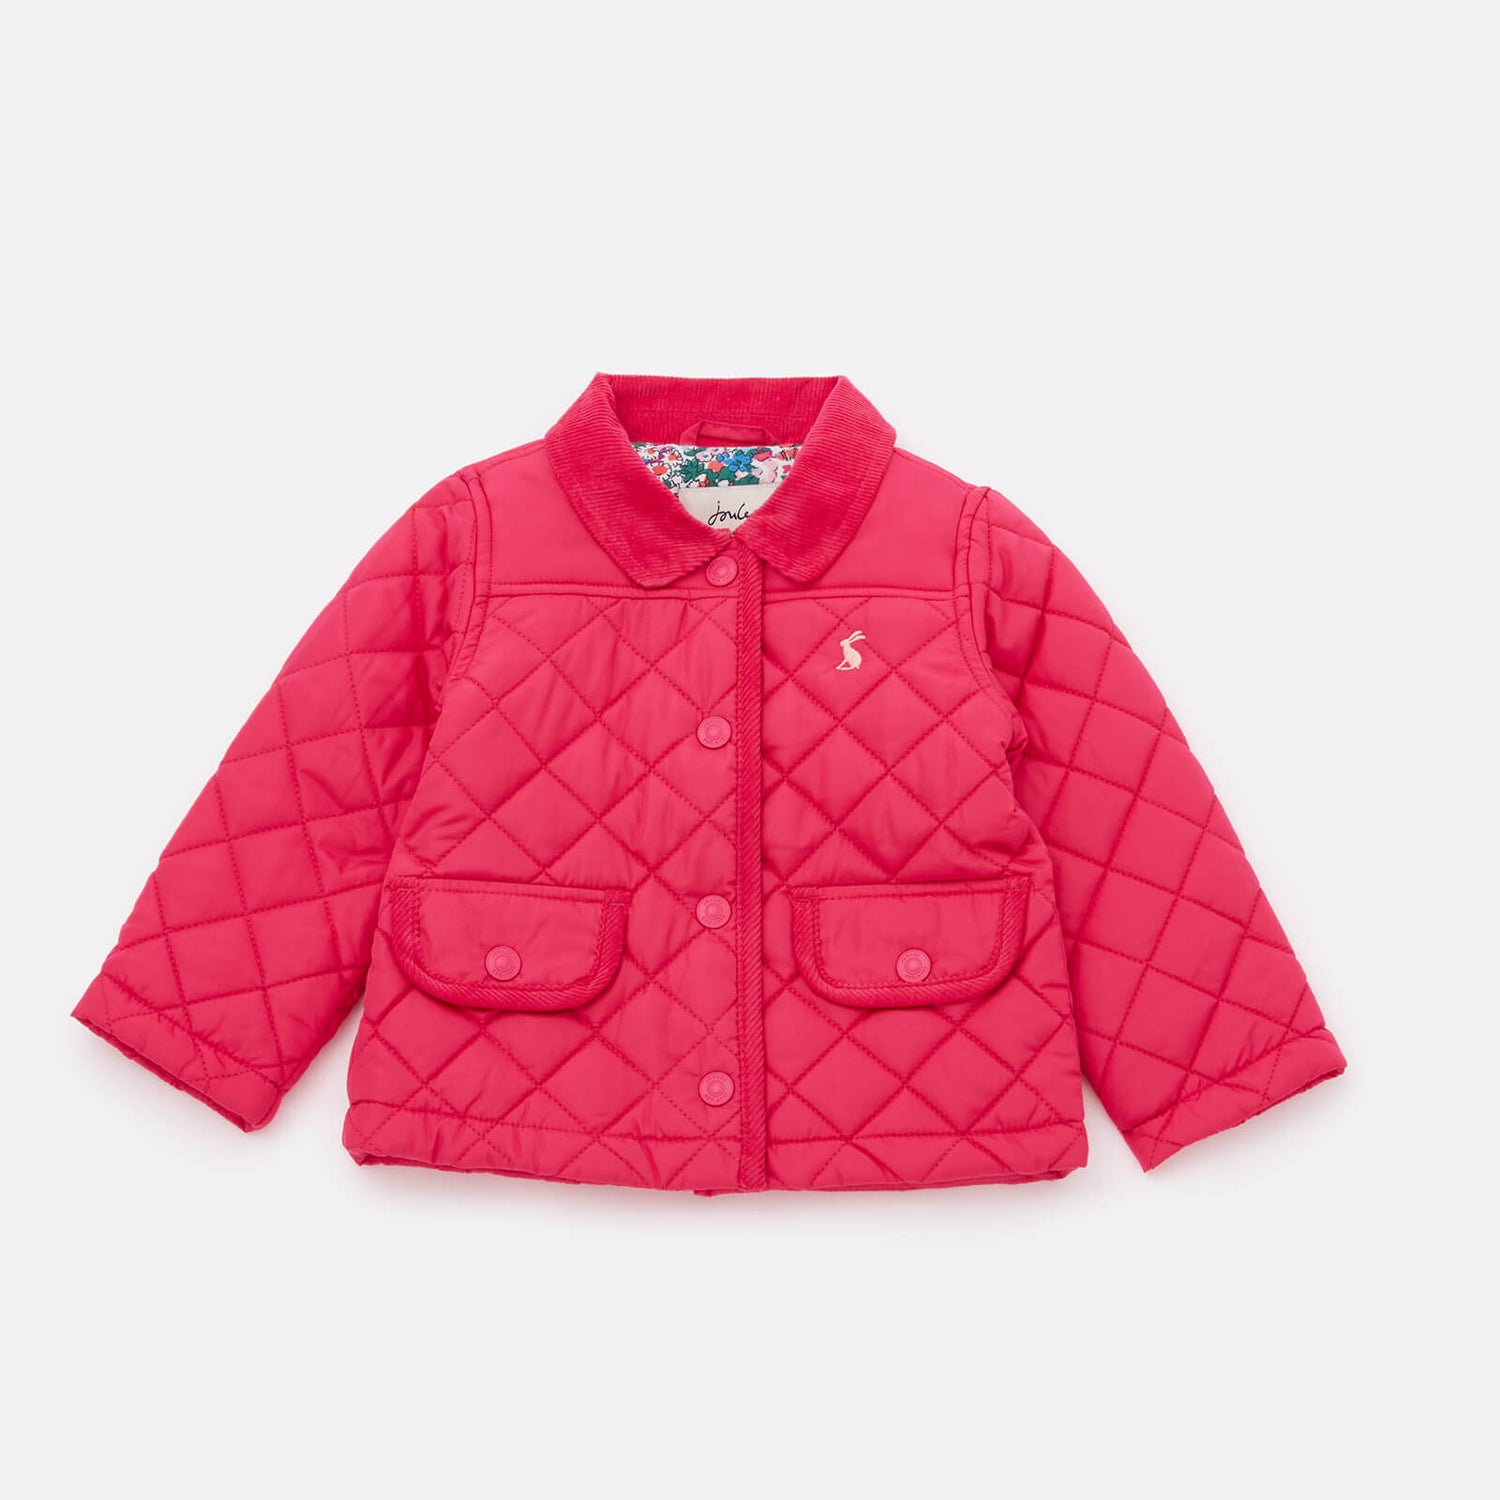 Joules Babies' Mabel Quilted Jacket